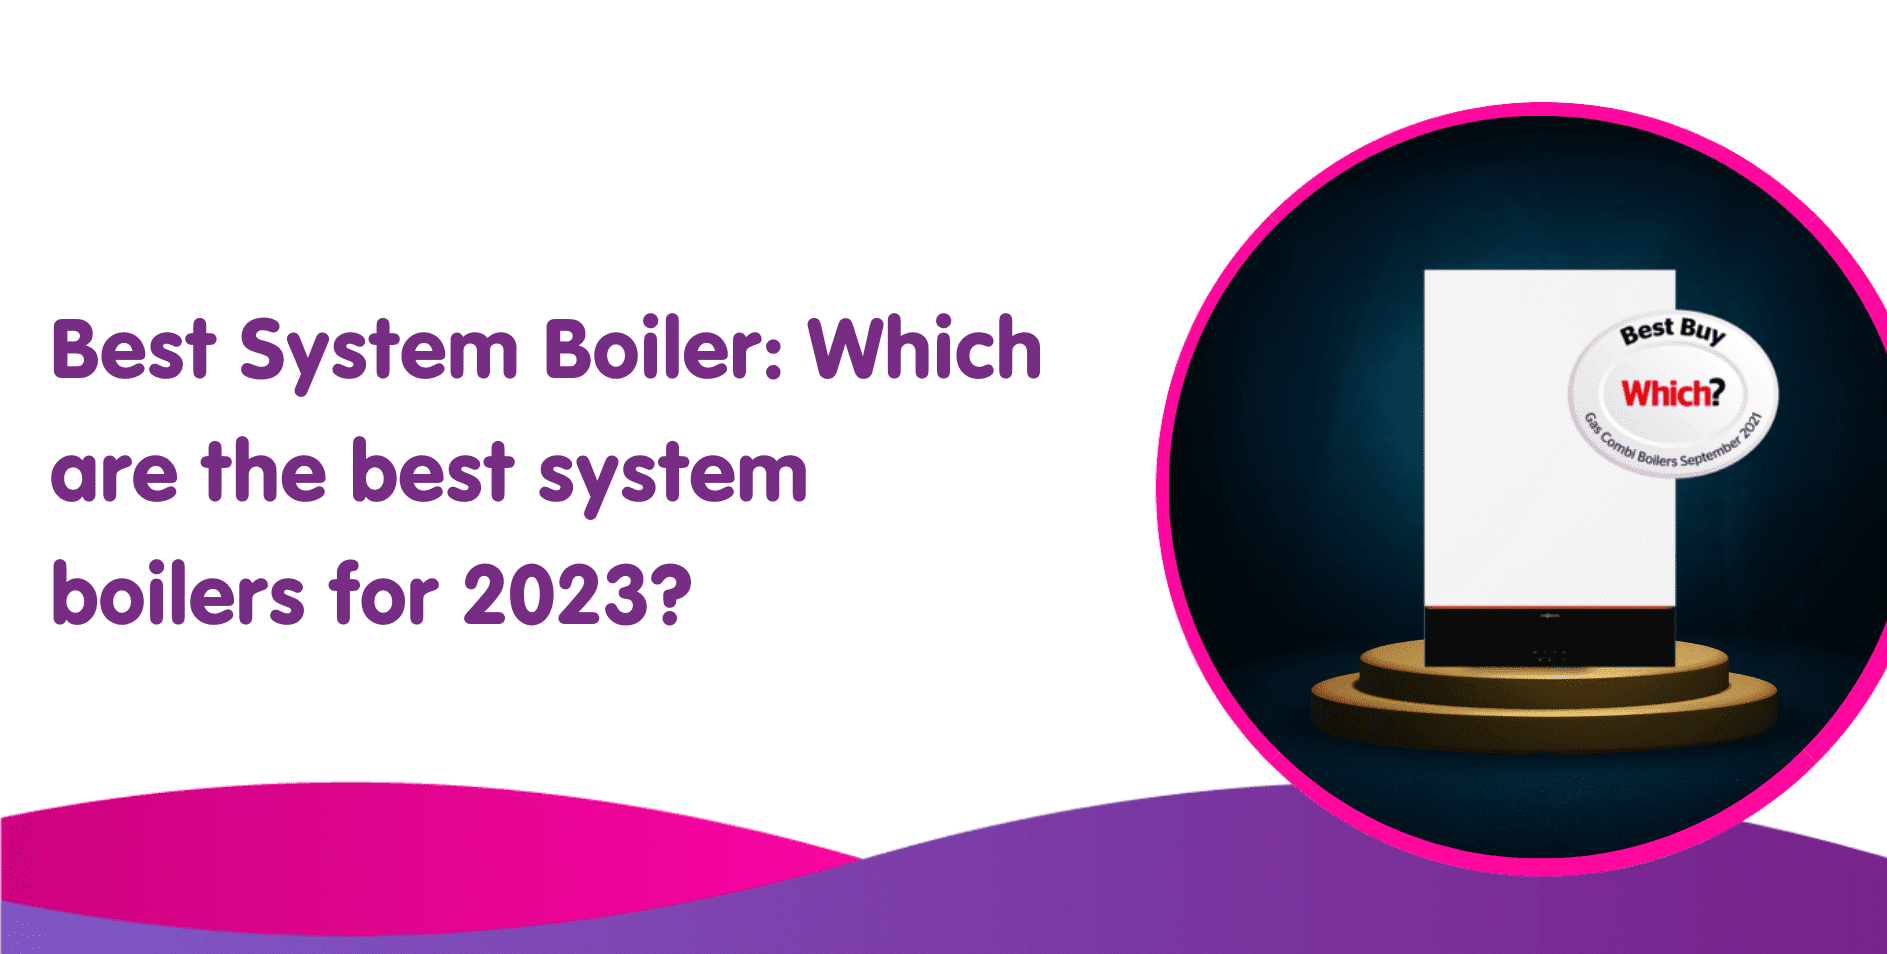 Best System Boiler: Which are the best system boilers for 2023?